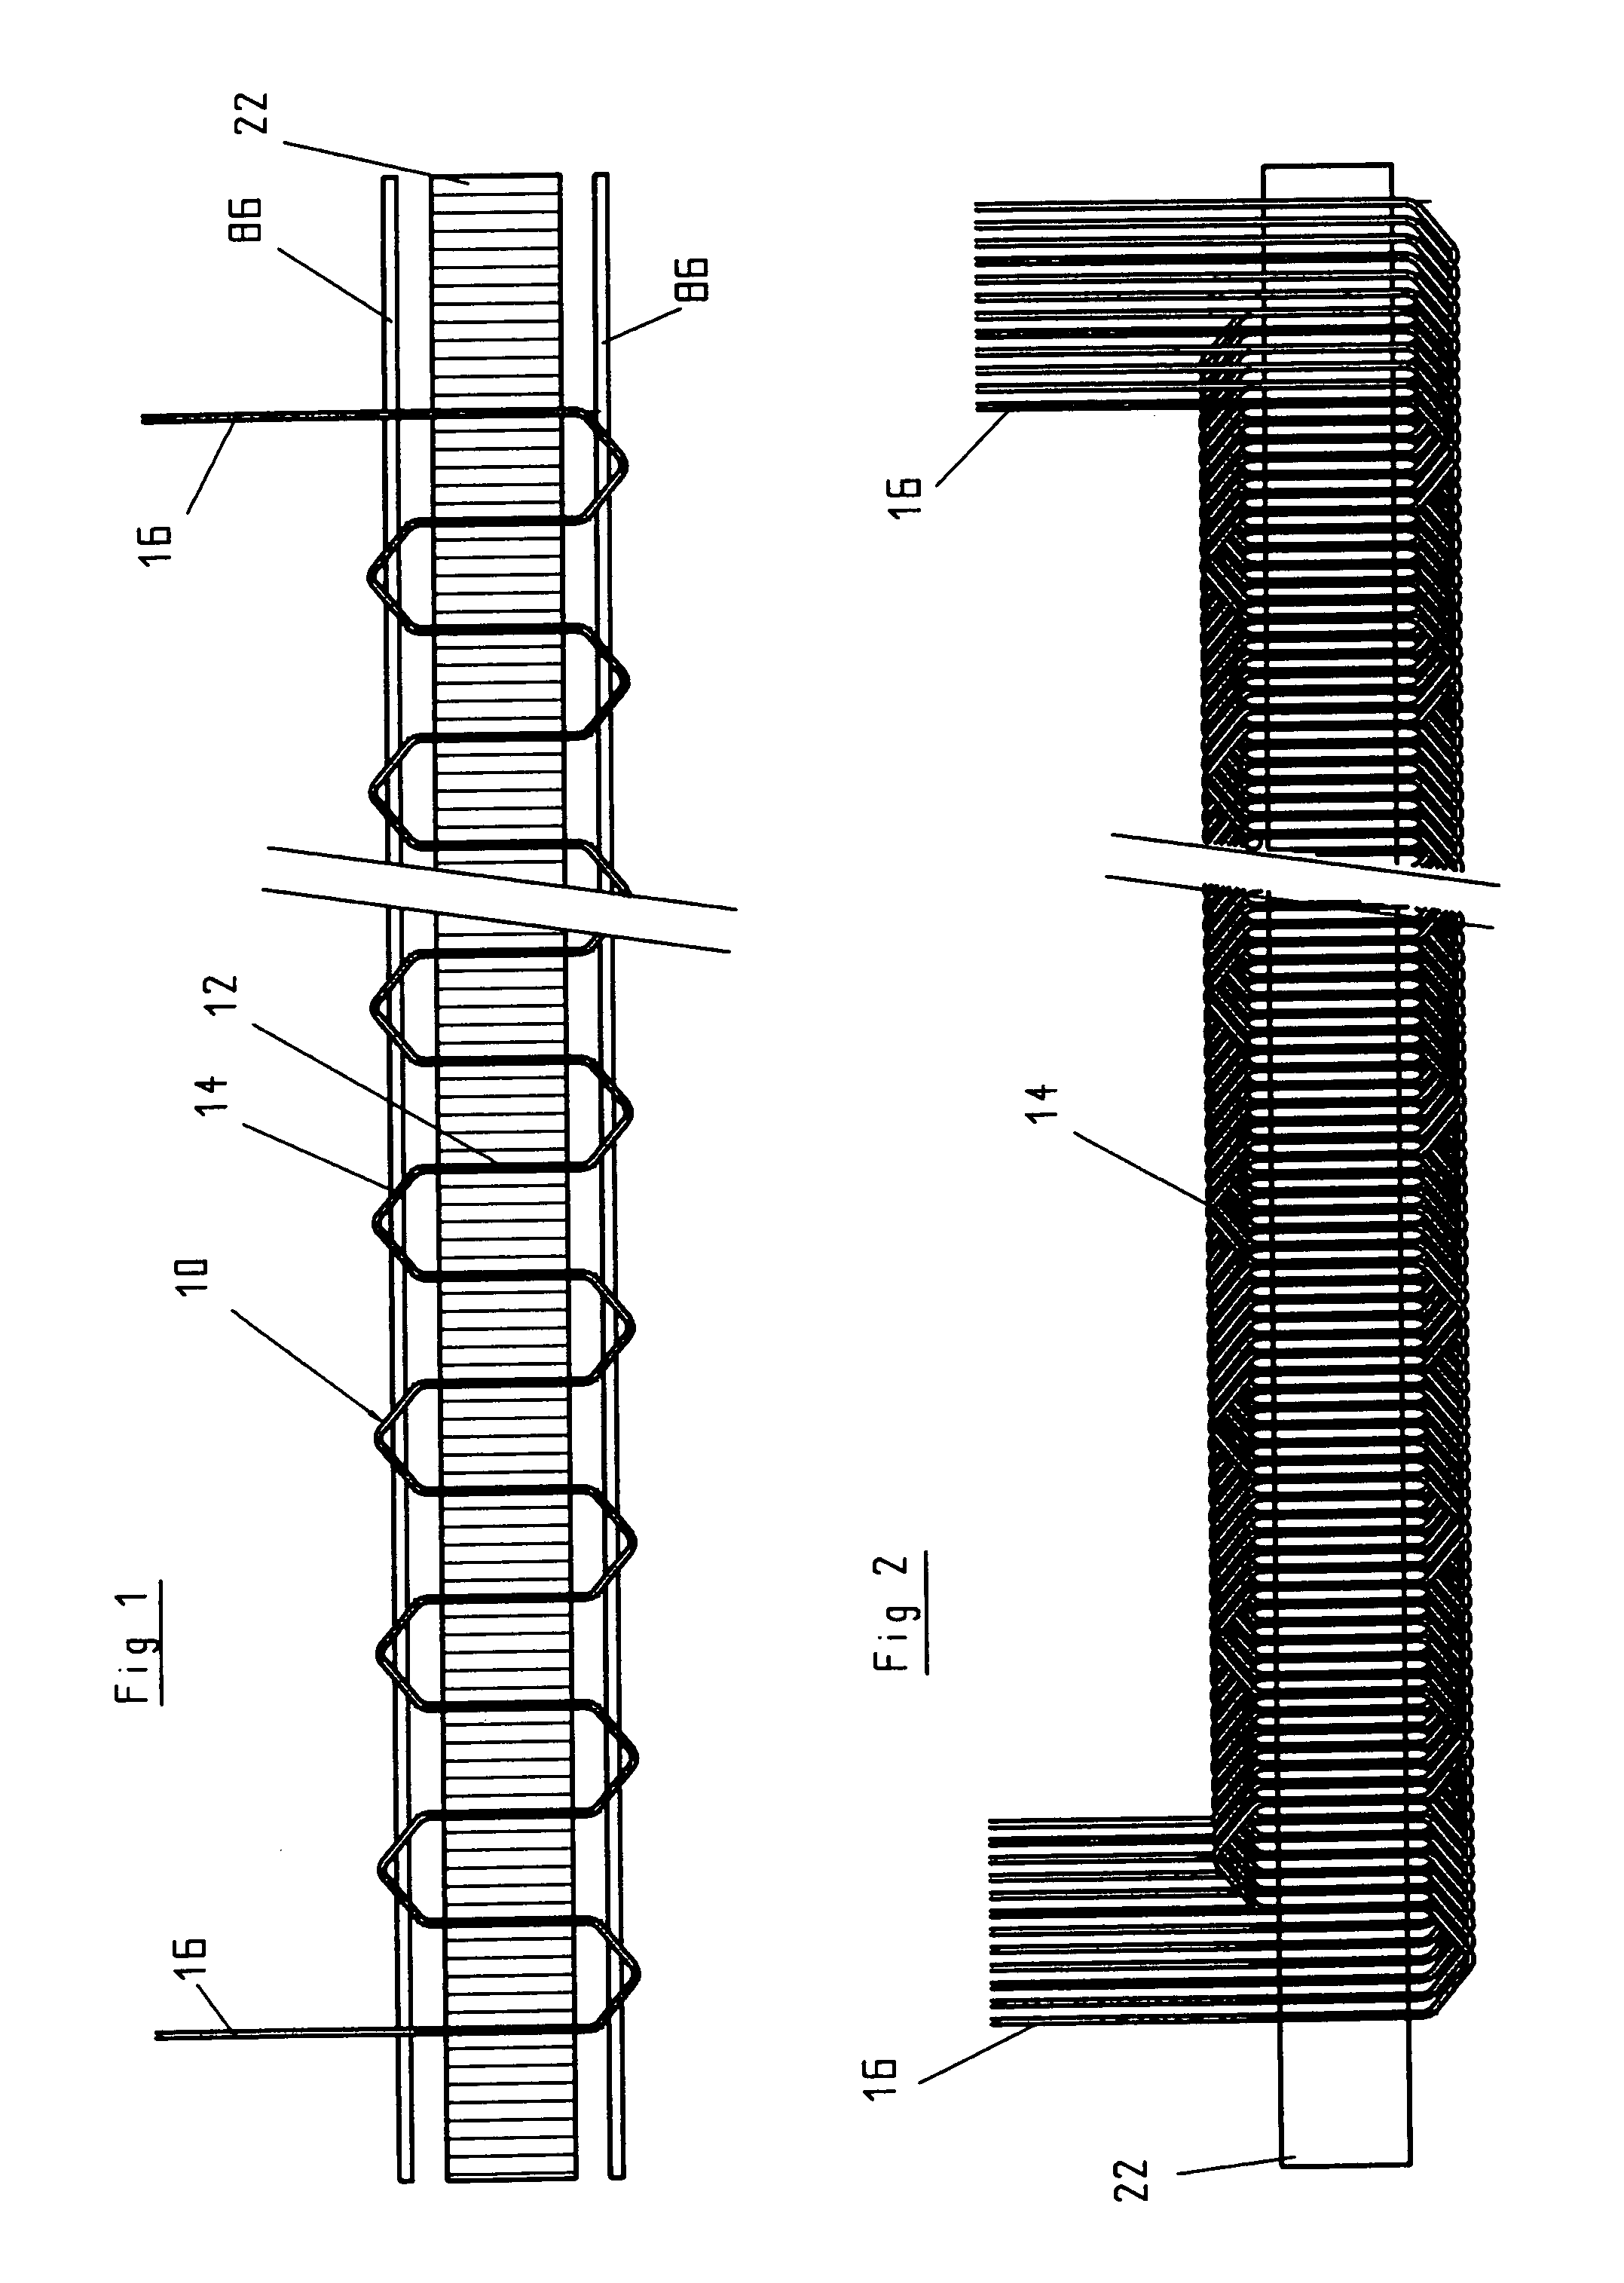 Apparatus for forming wave windings for rotor and stator lamination packets of electrical machines